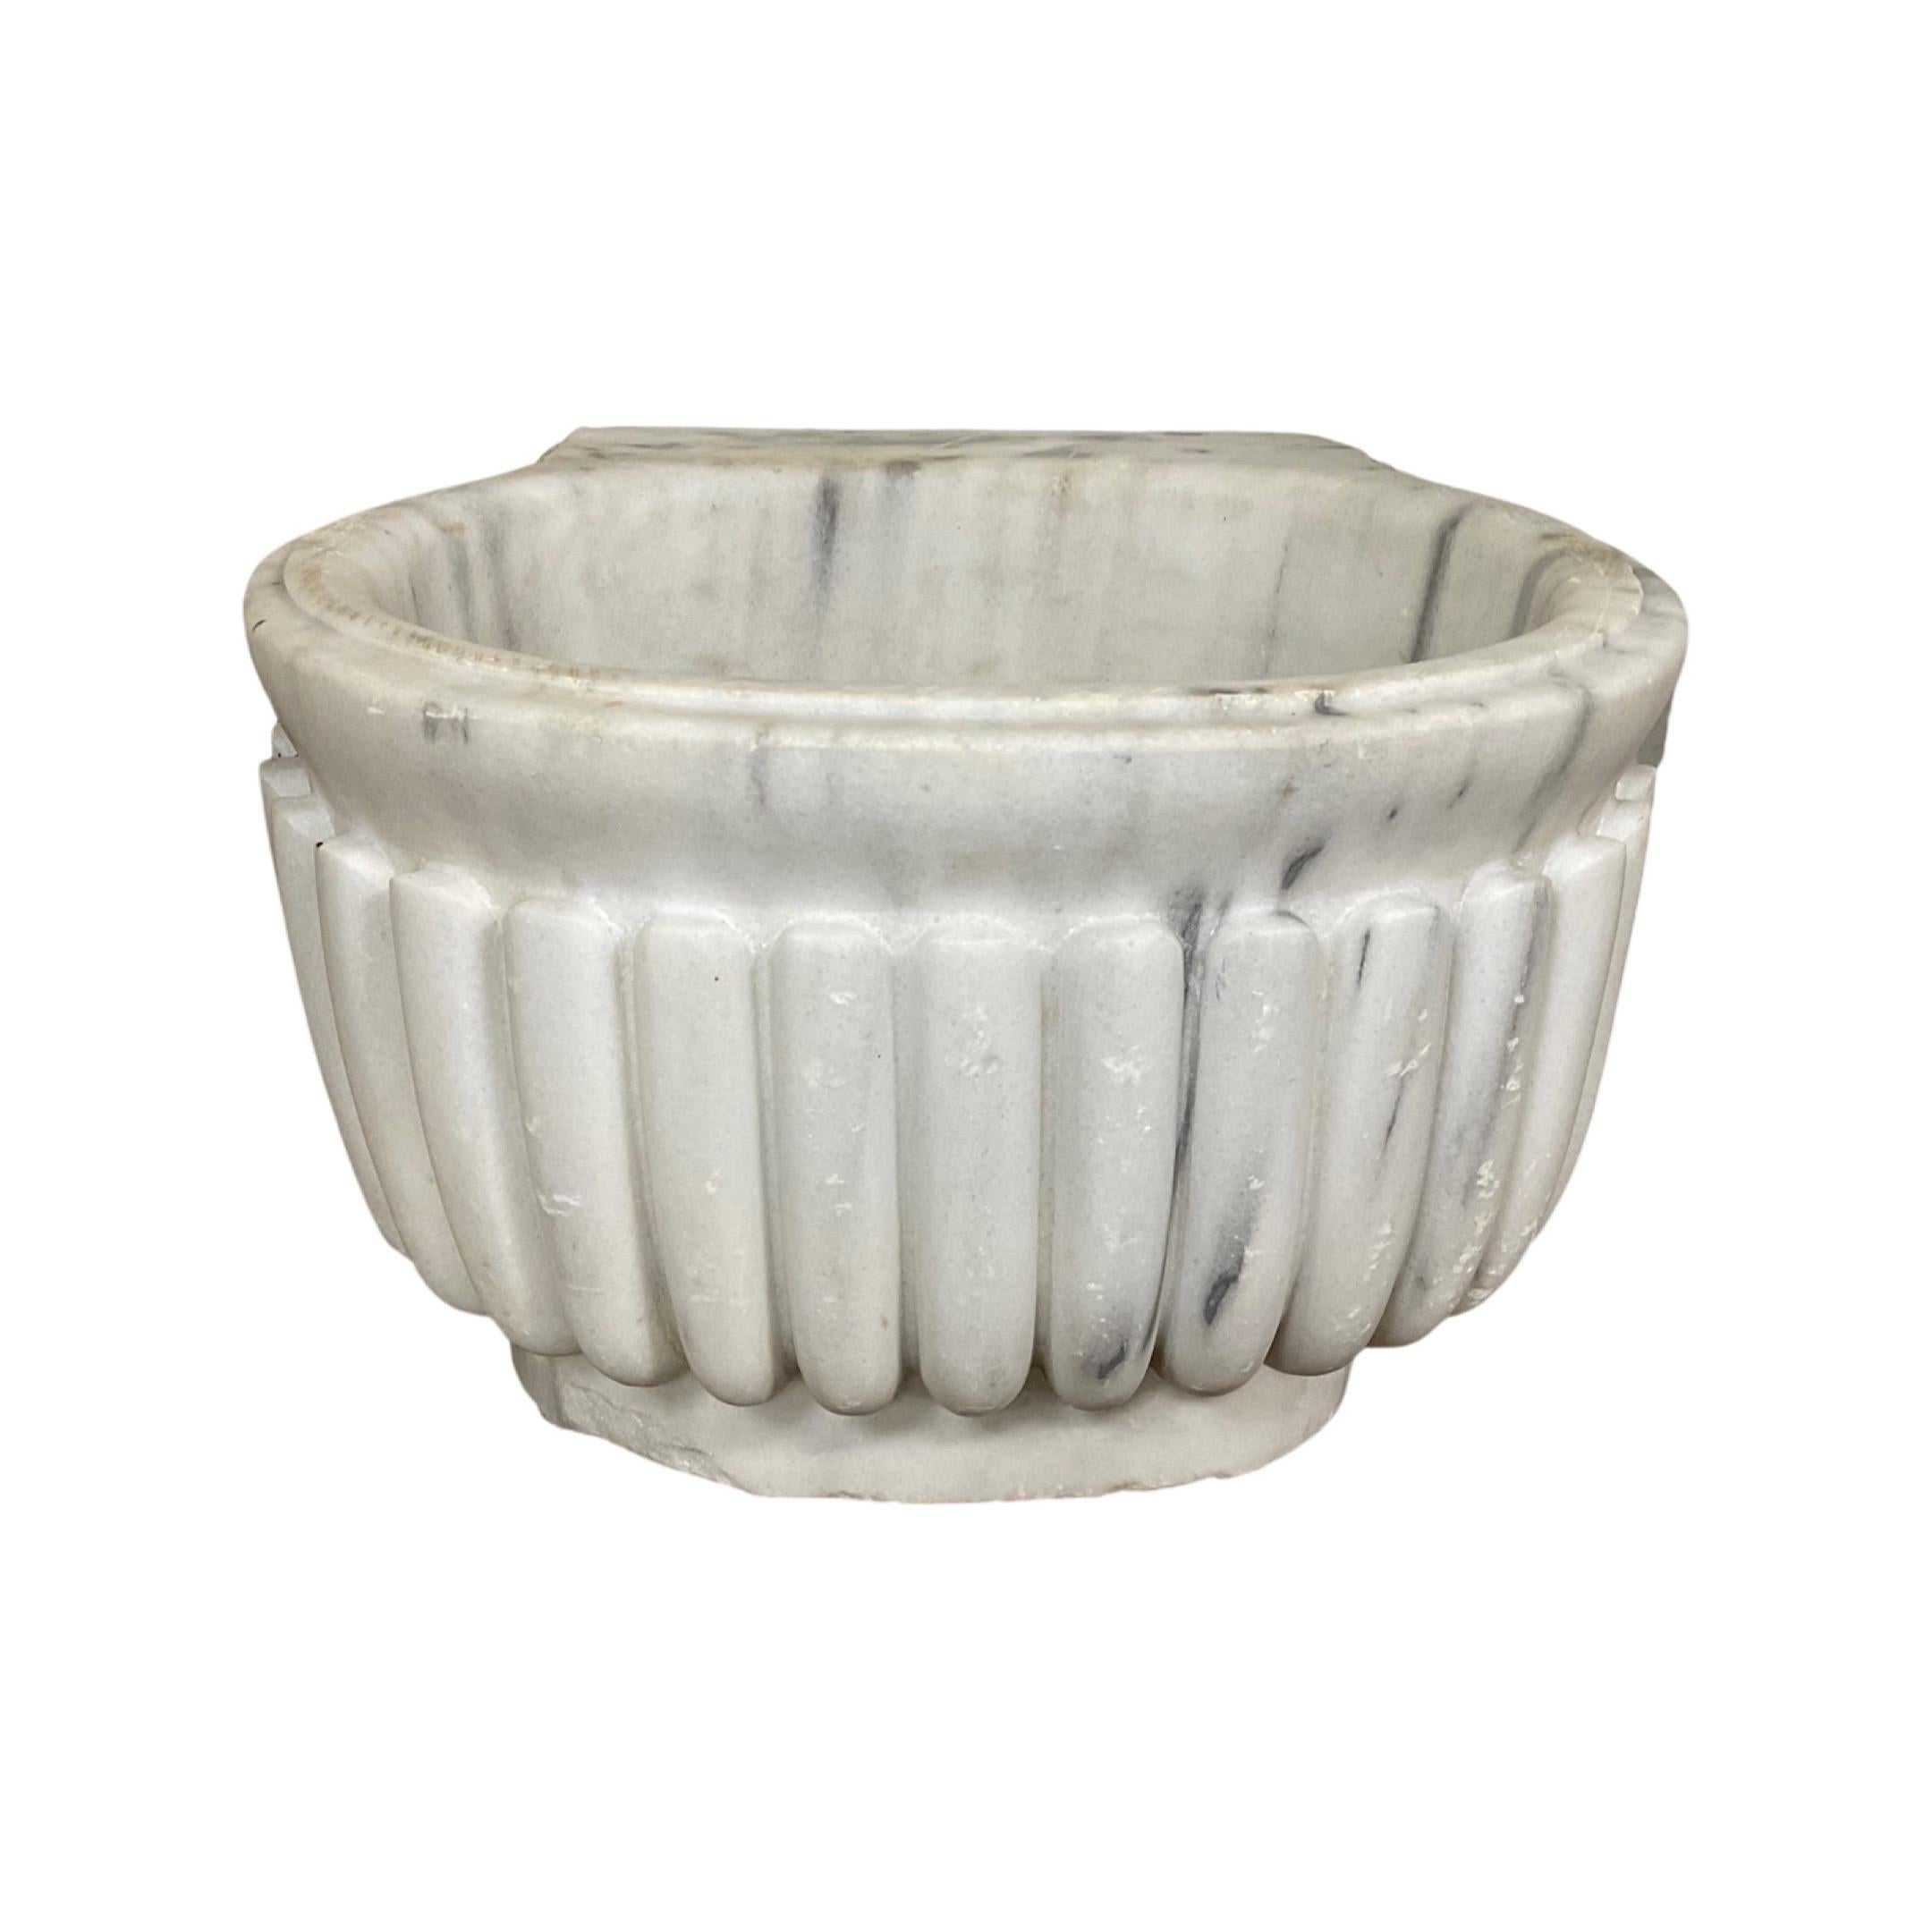 This French White Marble Sink is a timeless piece from the 18th century. It is sure to be an elegant key feature of any home with its timeless design and luxury white marble material. Add a classic touch to your home with this one-of-a-kind sink.